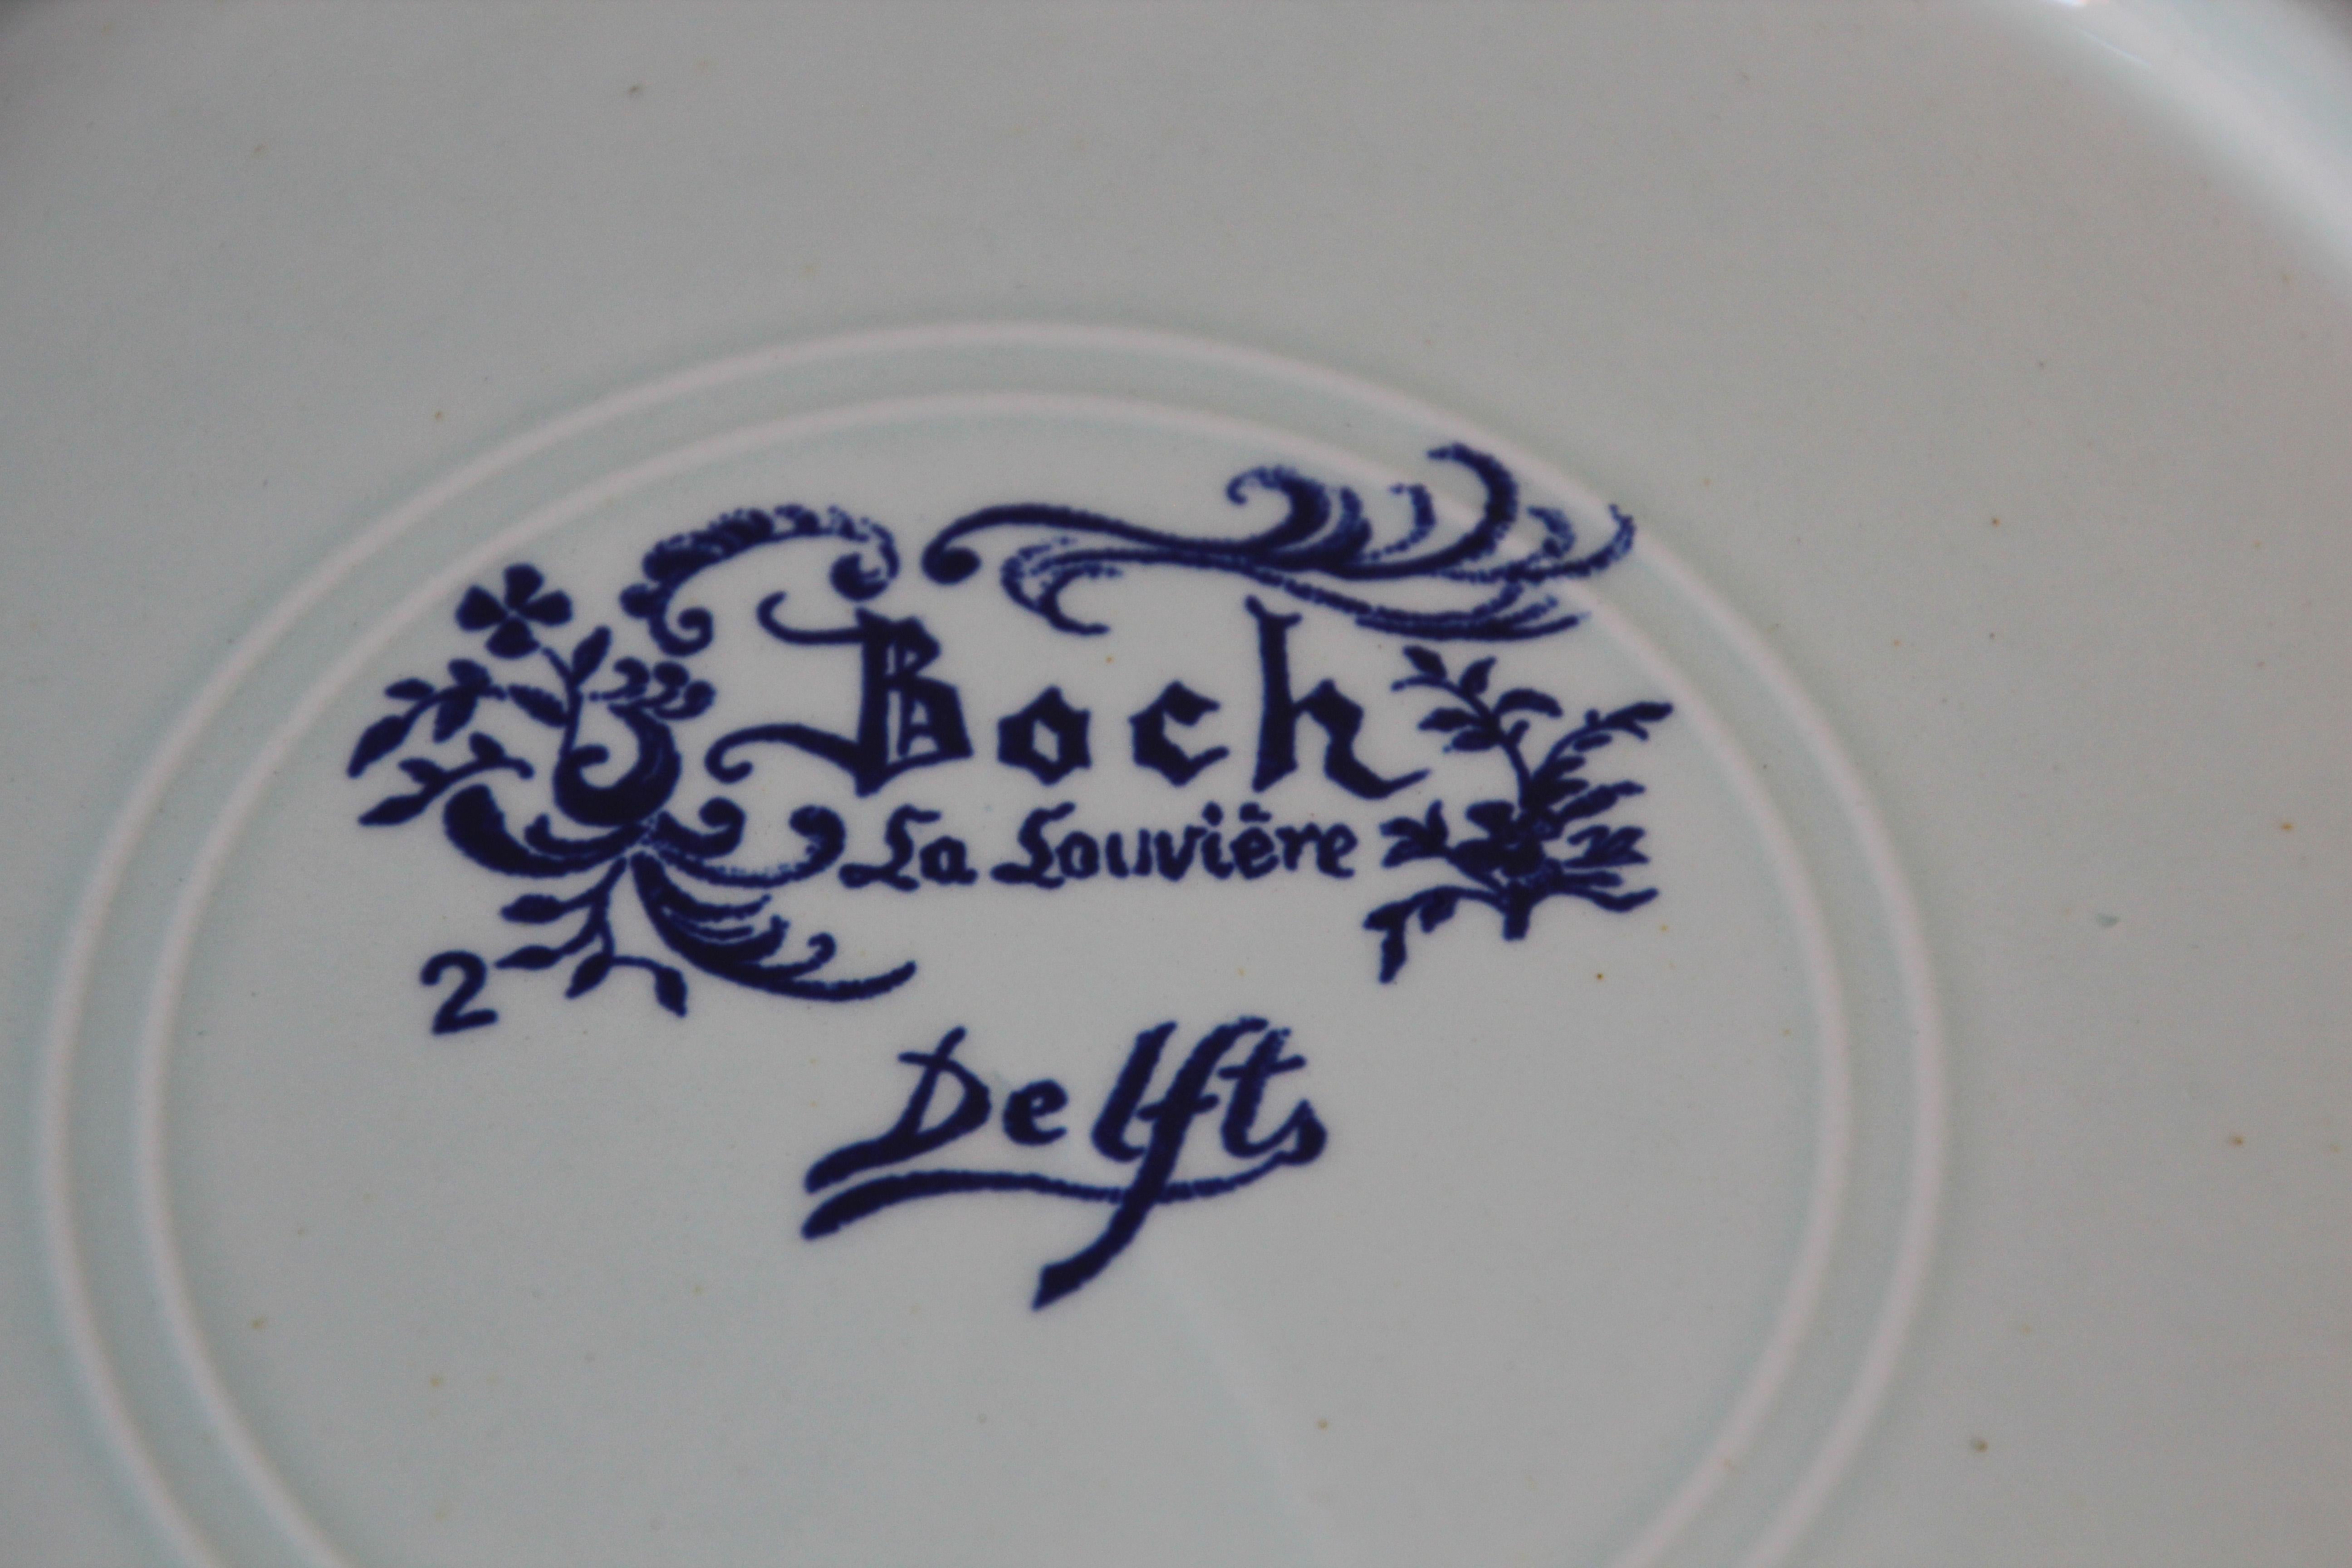 Large Ceramic Plate Blue and White Dutch Boch Delft Charger In Good Condition For Sale In North Hollywood, CA